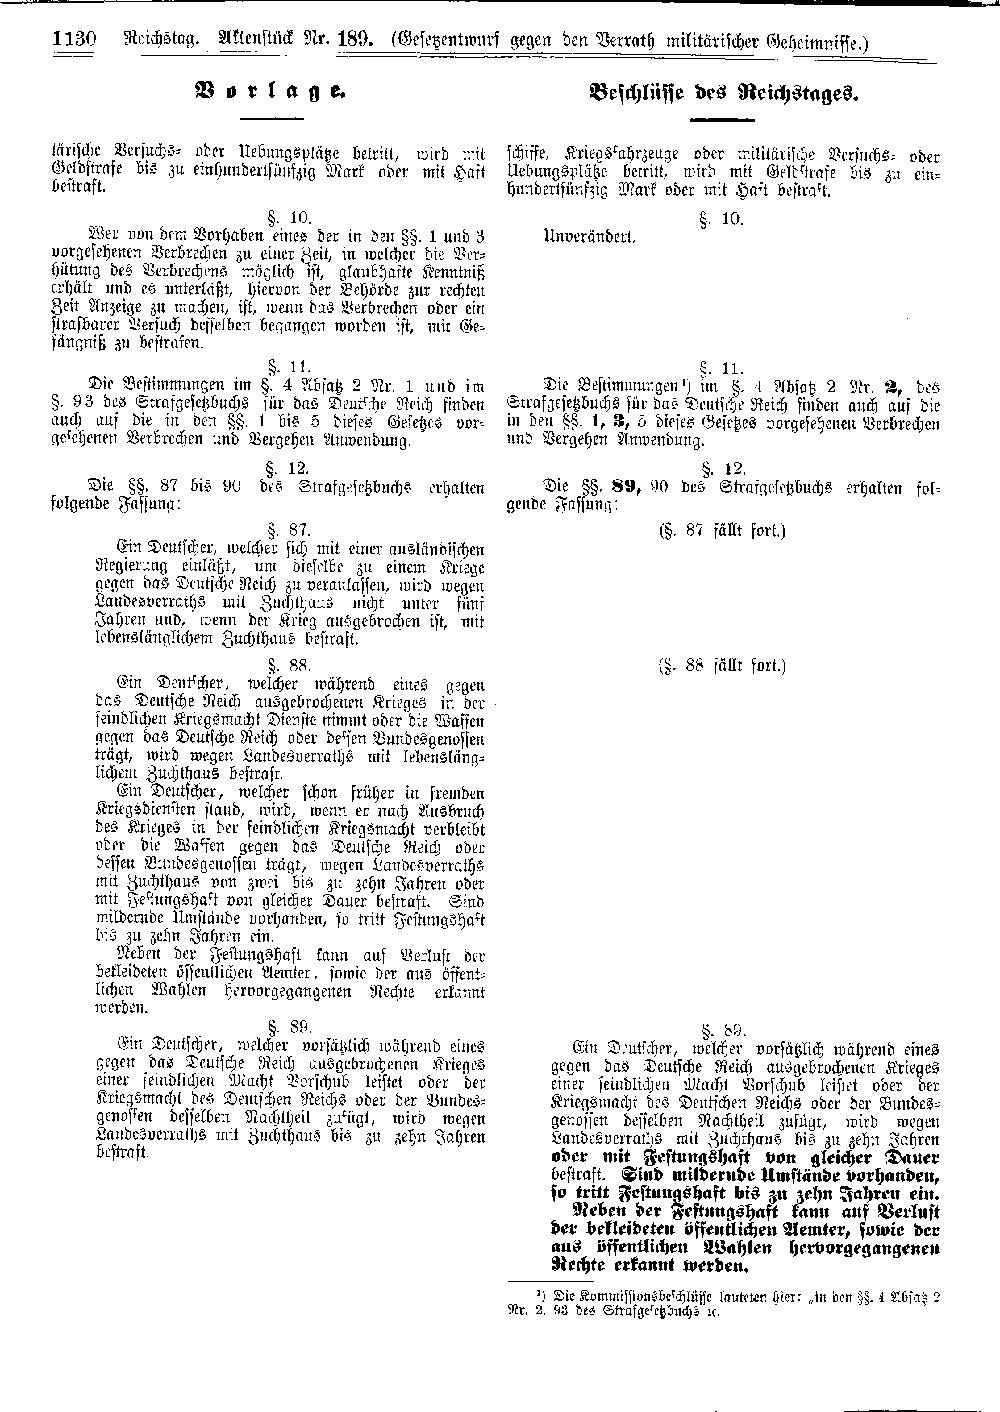 Scan of page 1130